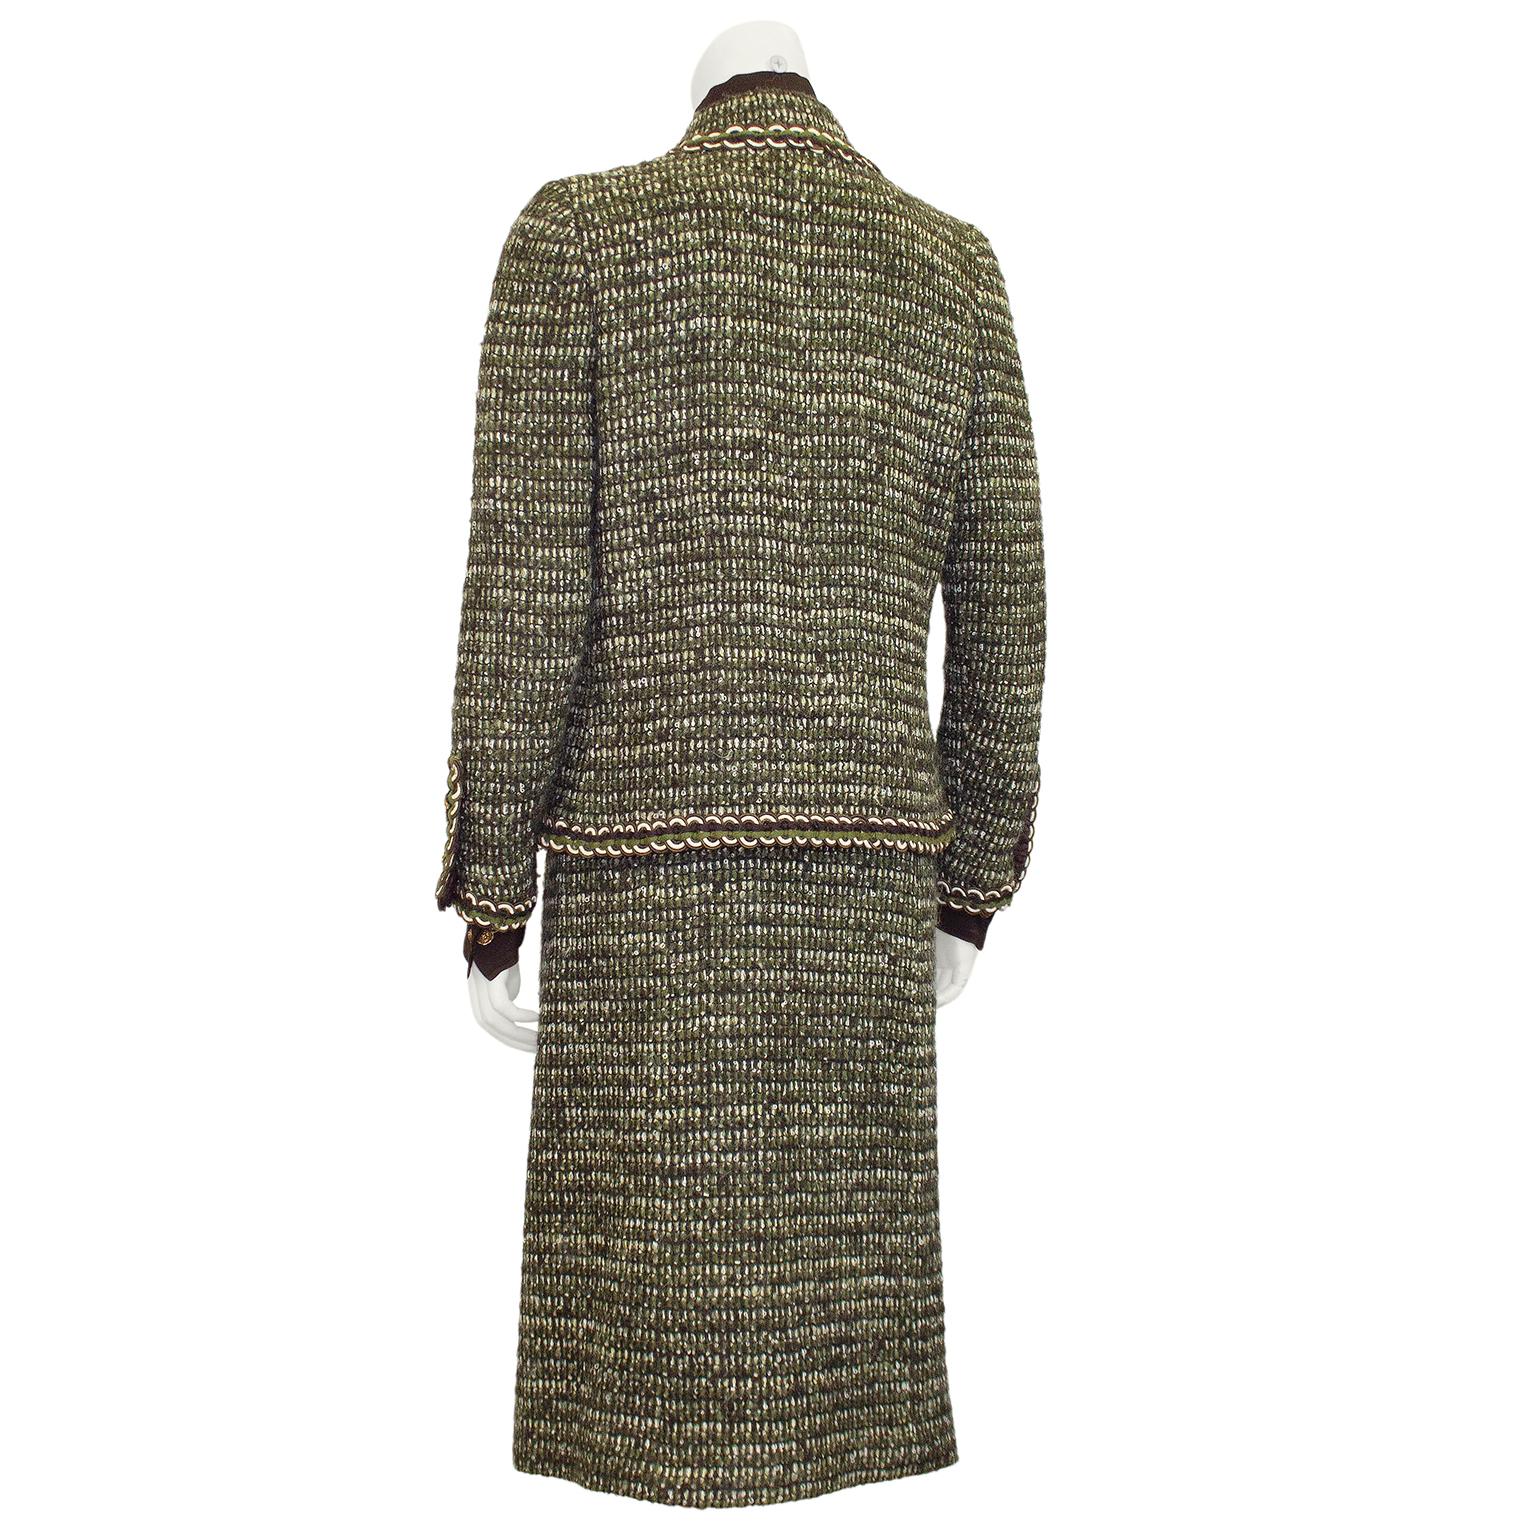 1981 Chanel Haute Couture Green and Brown Tweed 4 Piece Skirt Suit In Good Condition For Sale In Toronto, Ontario